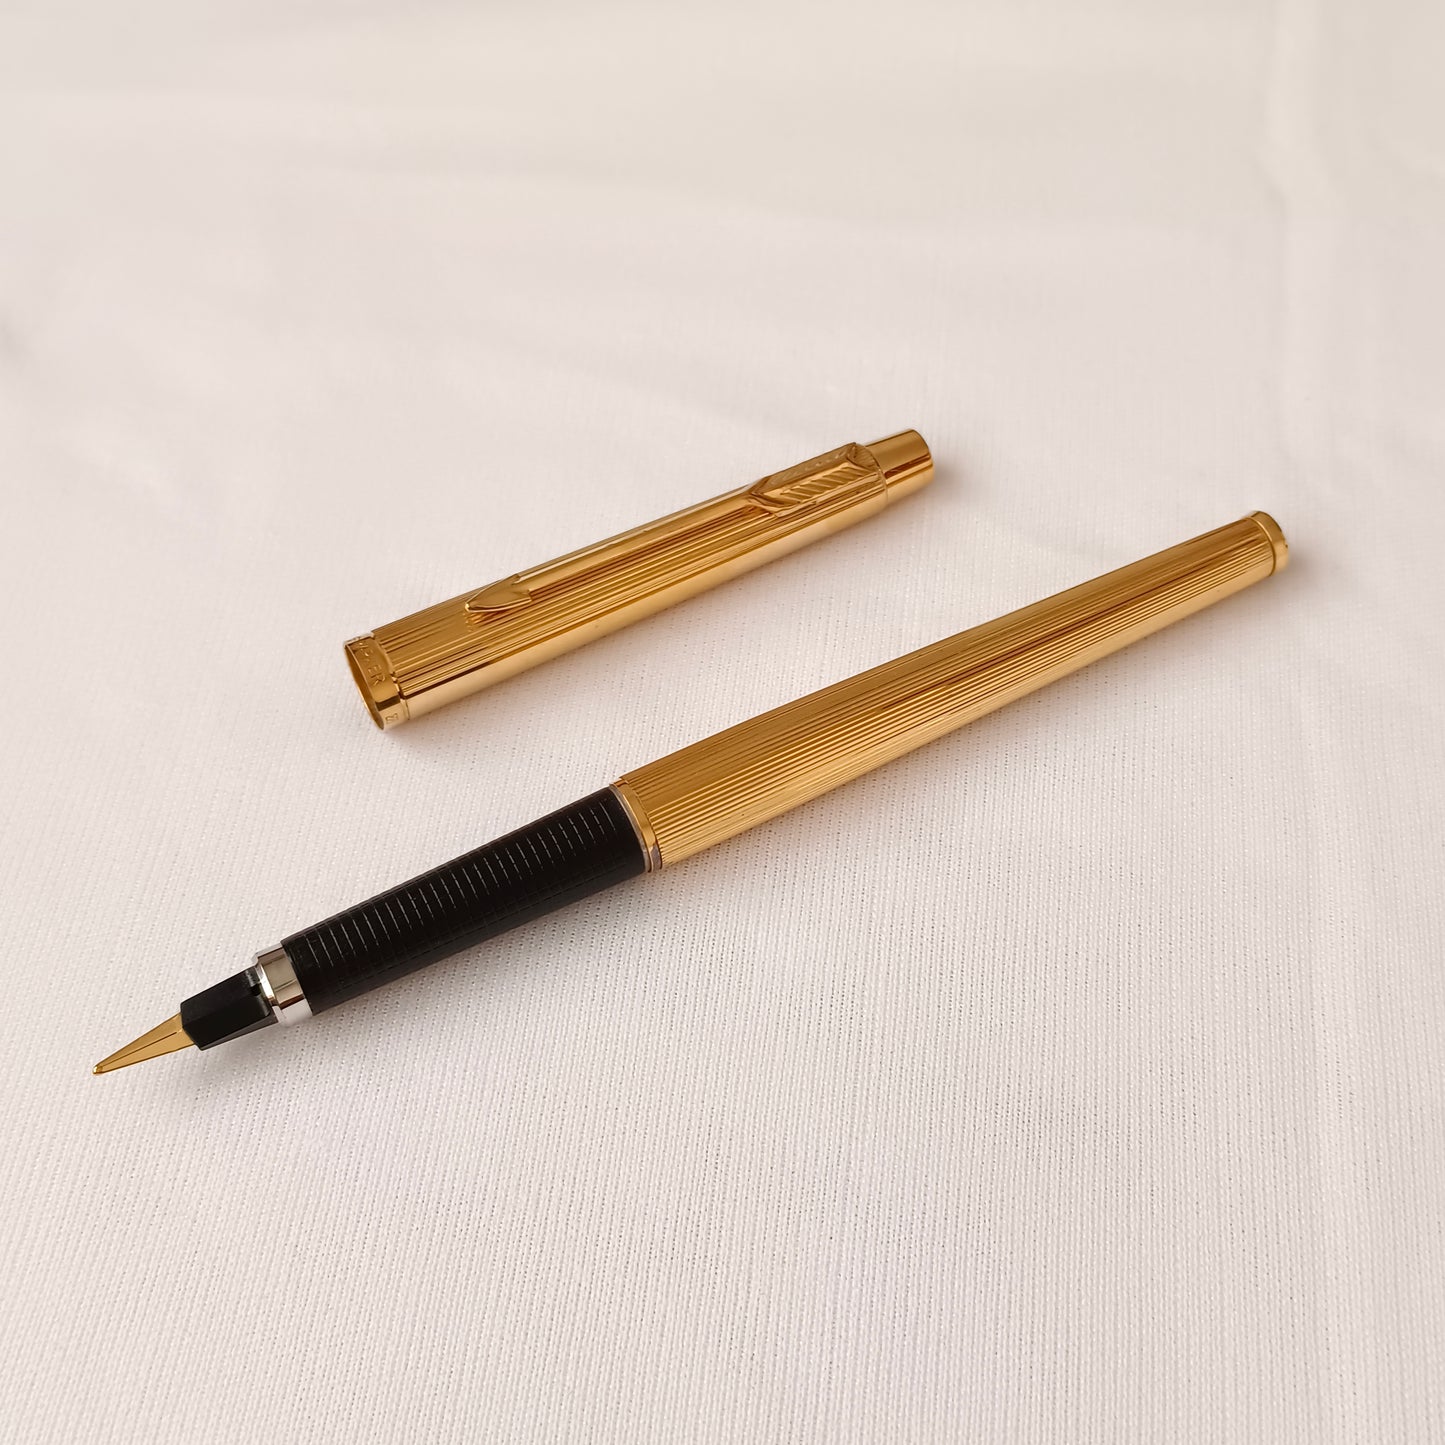 Vintage Parker Classic Flighter Fountain Pen Made in UK